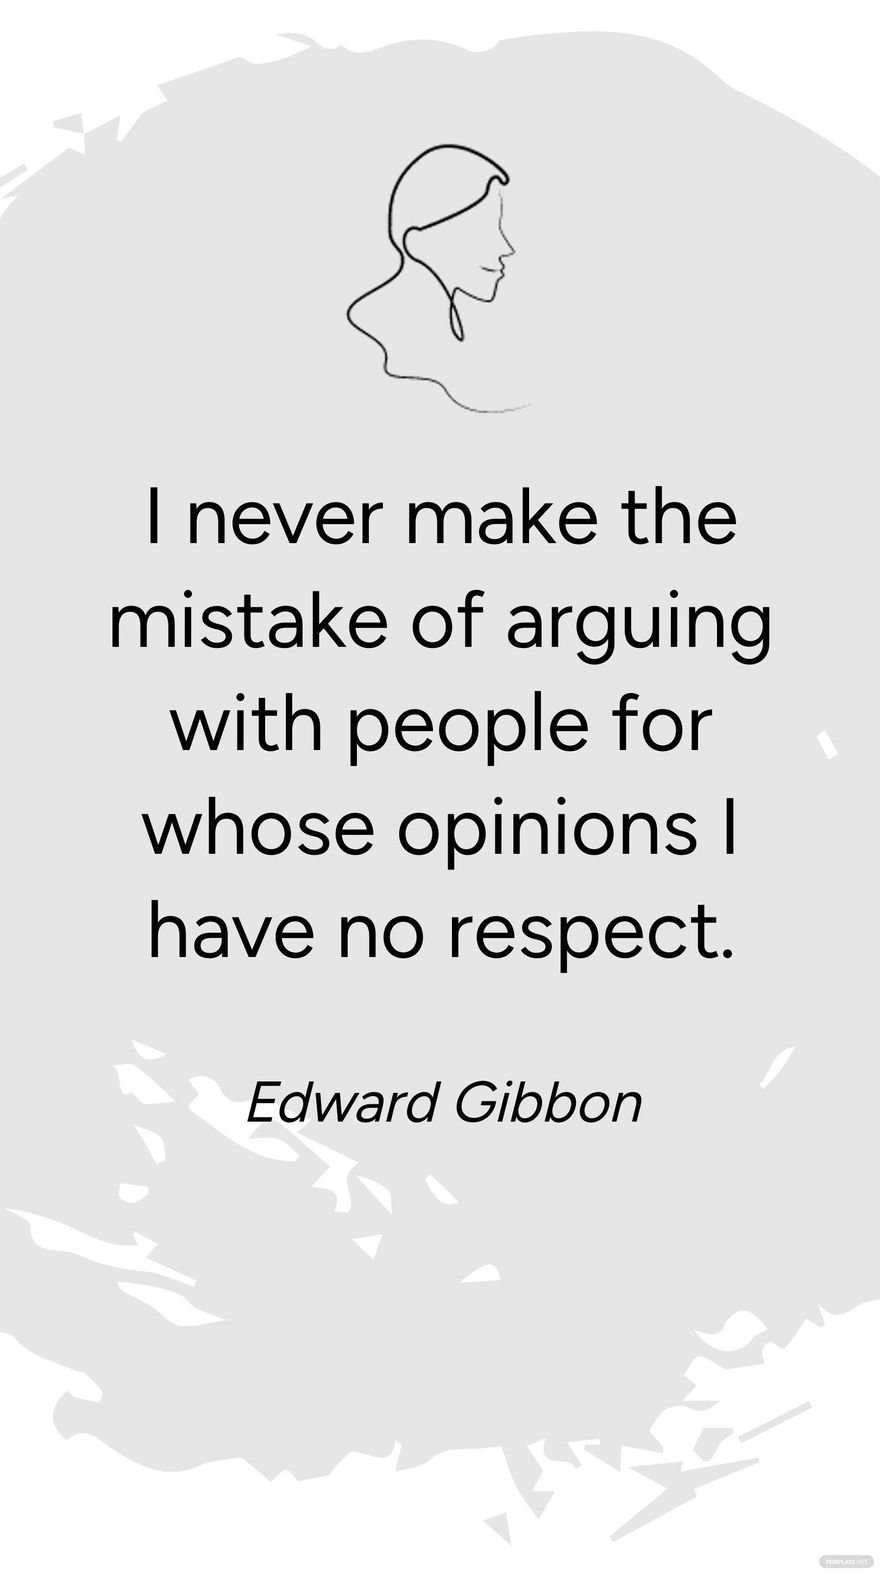 Edward Gibbon - I never make the mistake of arguing with people for whose opinions I have no respect.